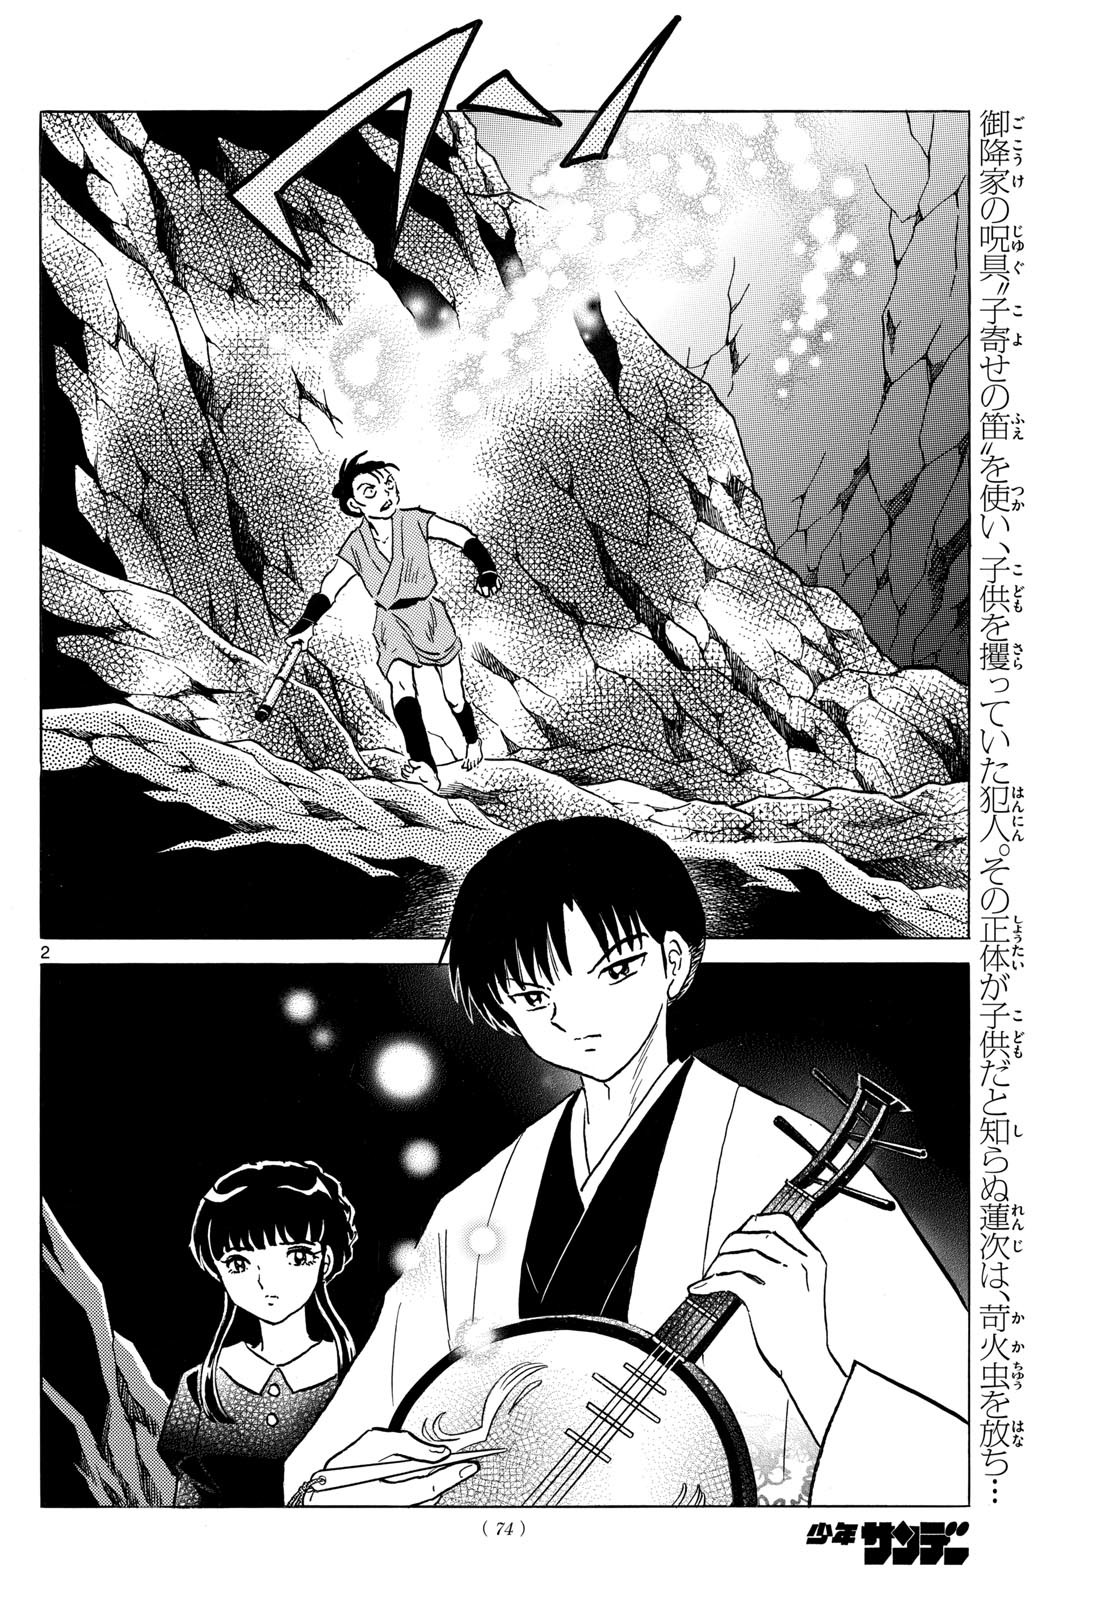 MAO - Chapter 203 - Page 2